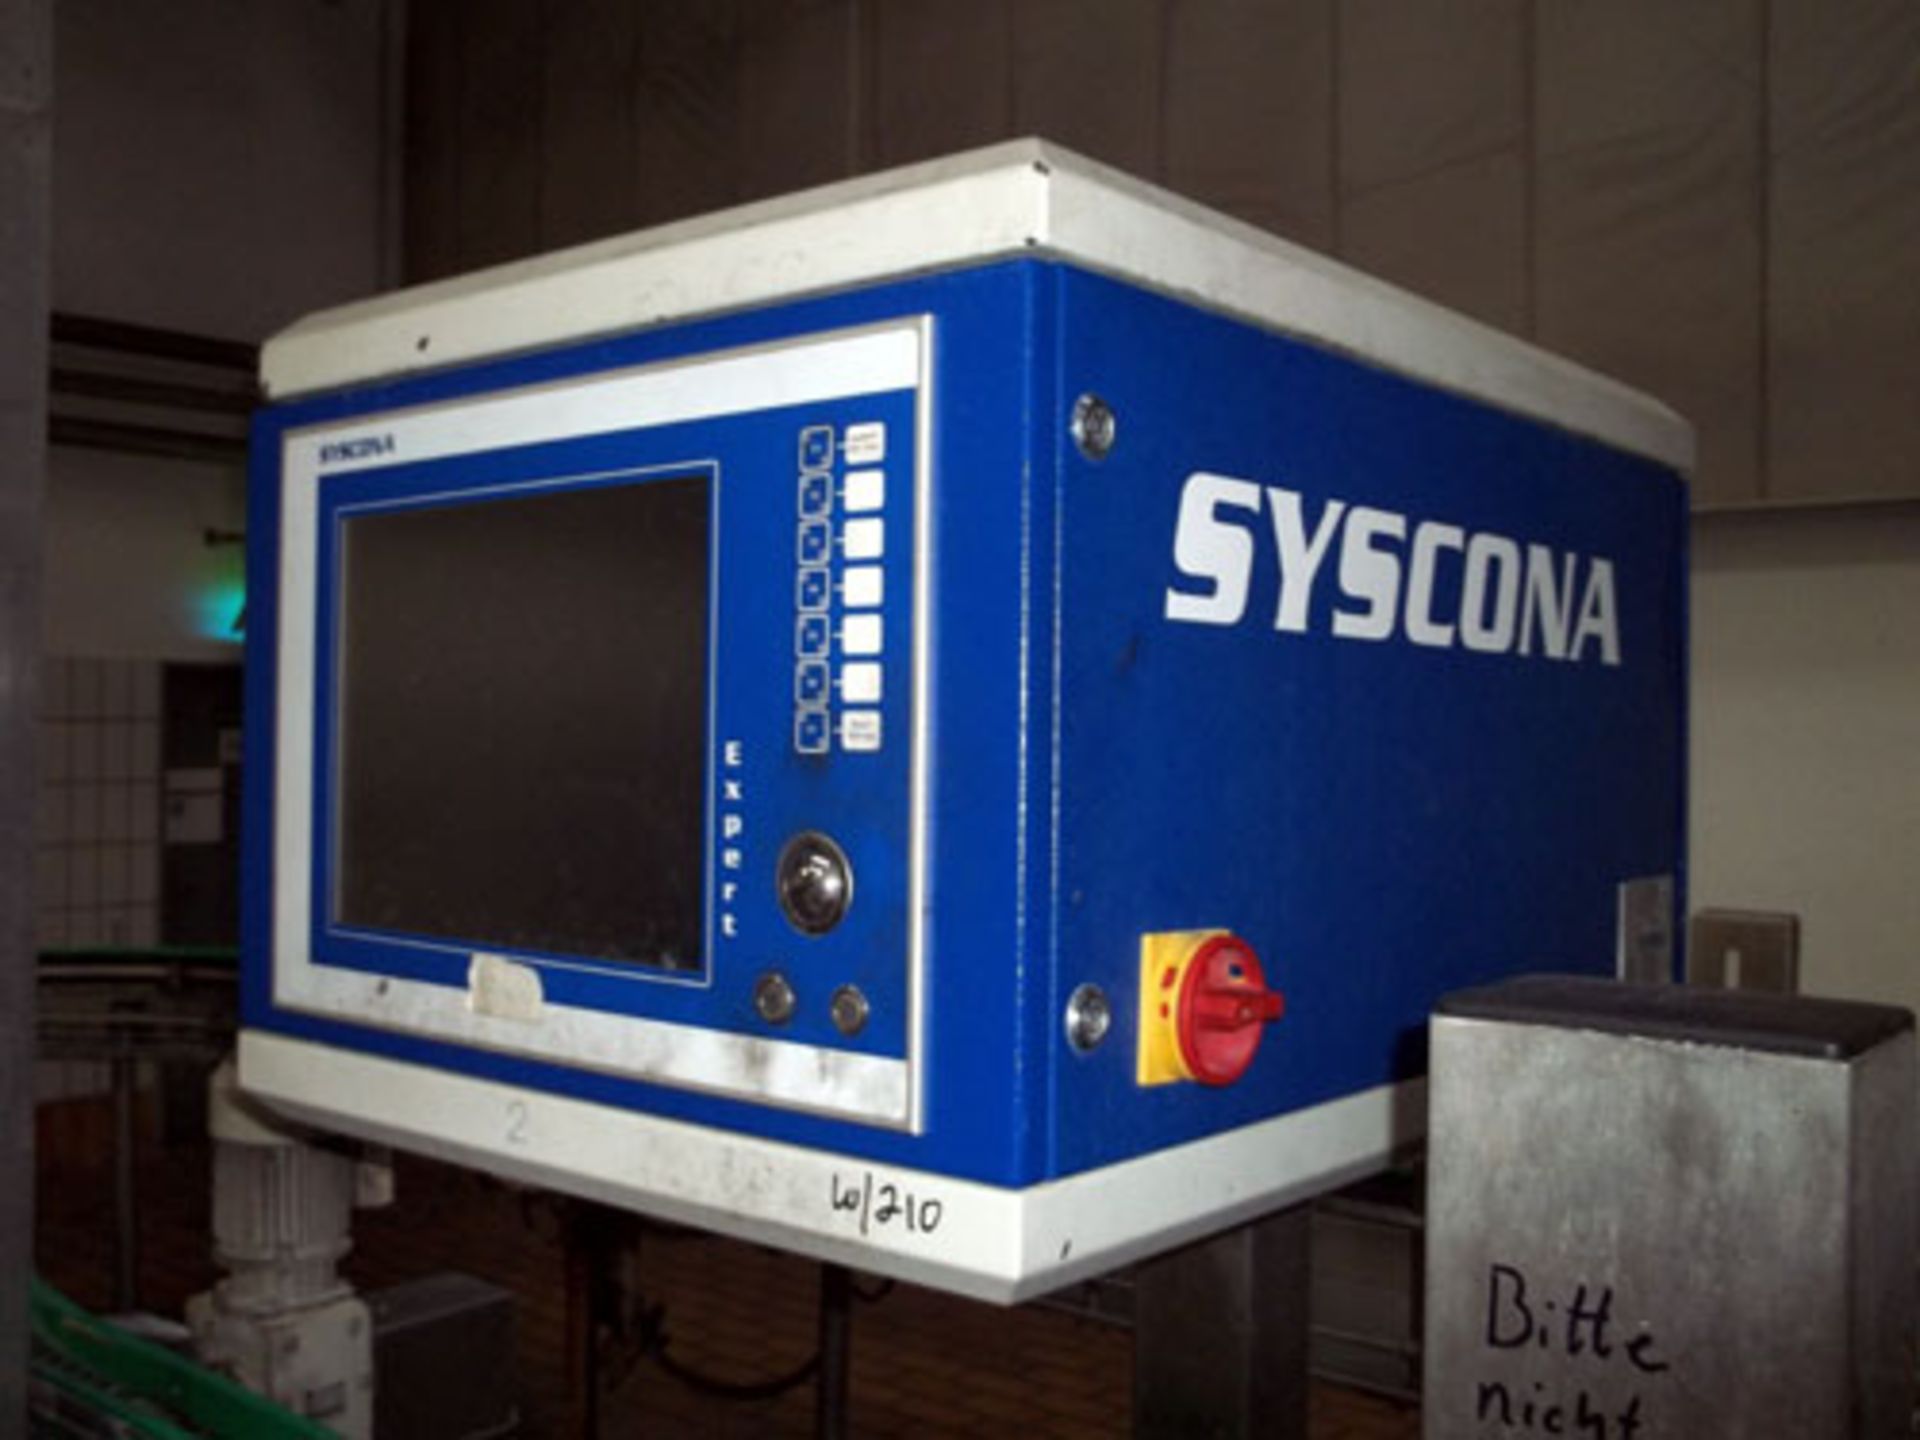 Syscona Expert FHK Fill Level Control System. Serial# 2010-1022-1, **(Please note - acceptance of - Image 4 of 5